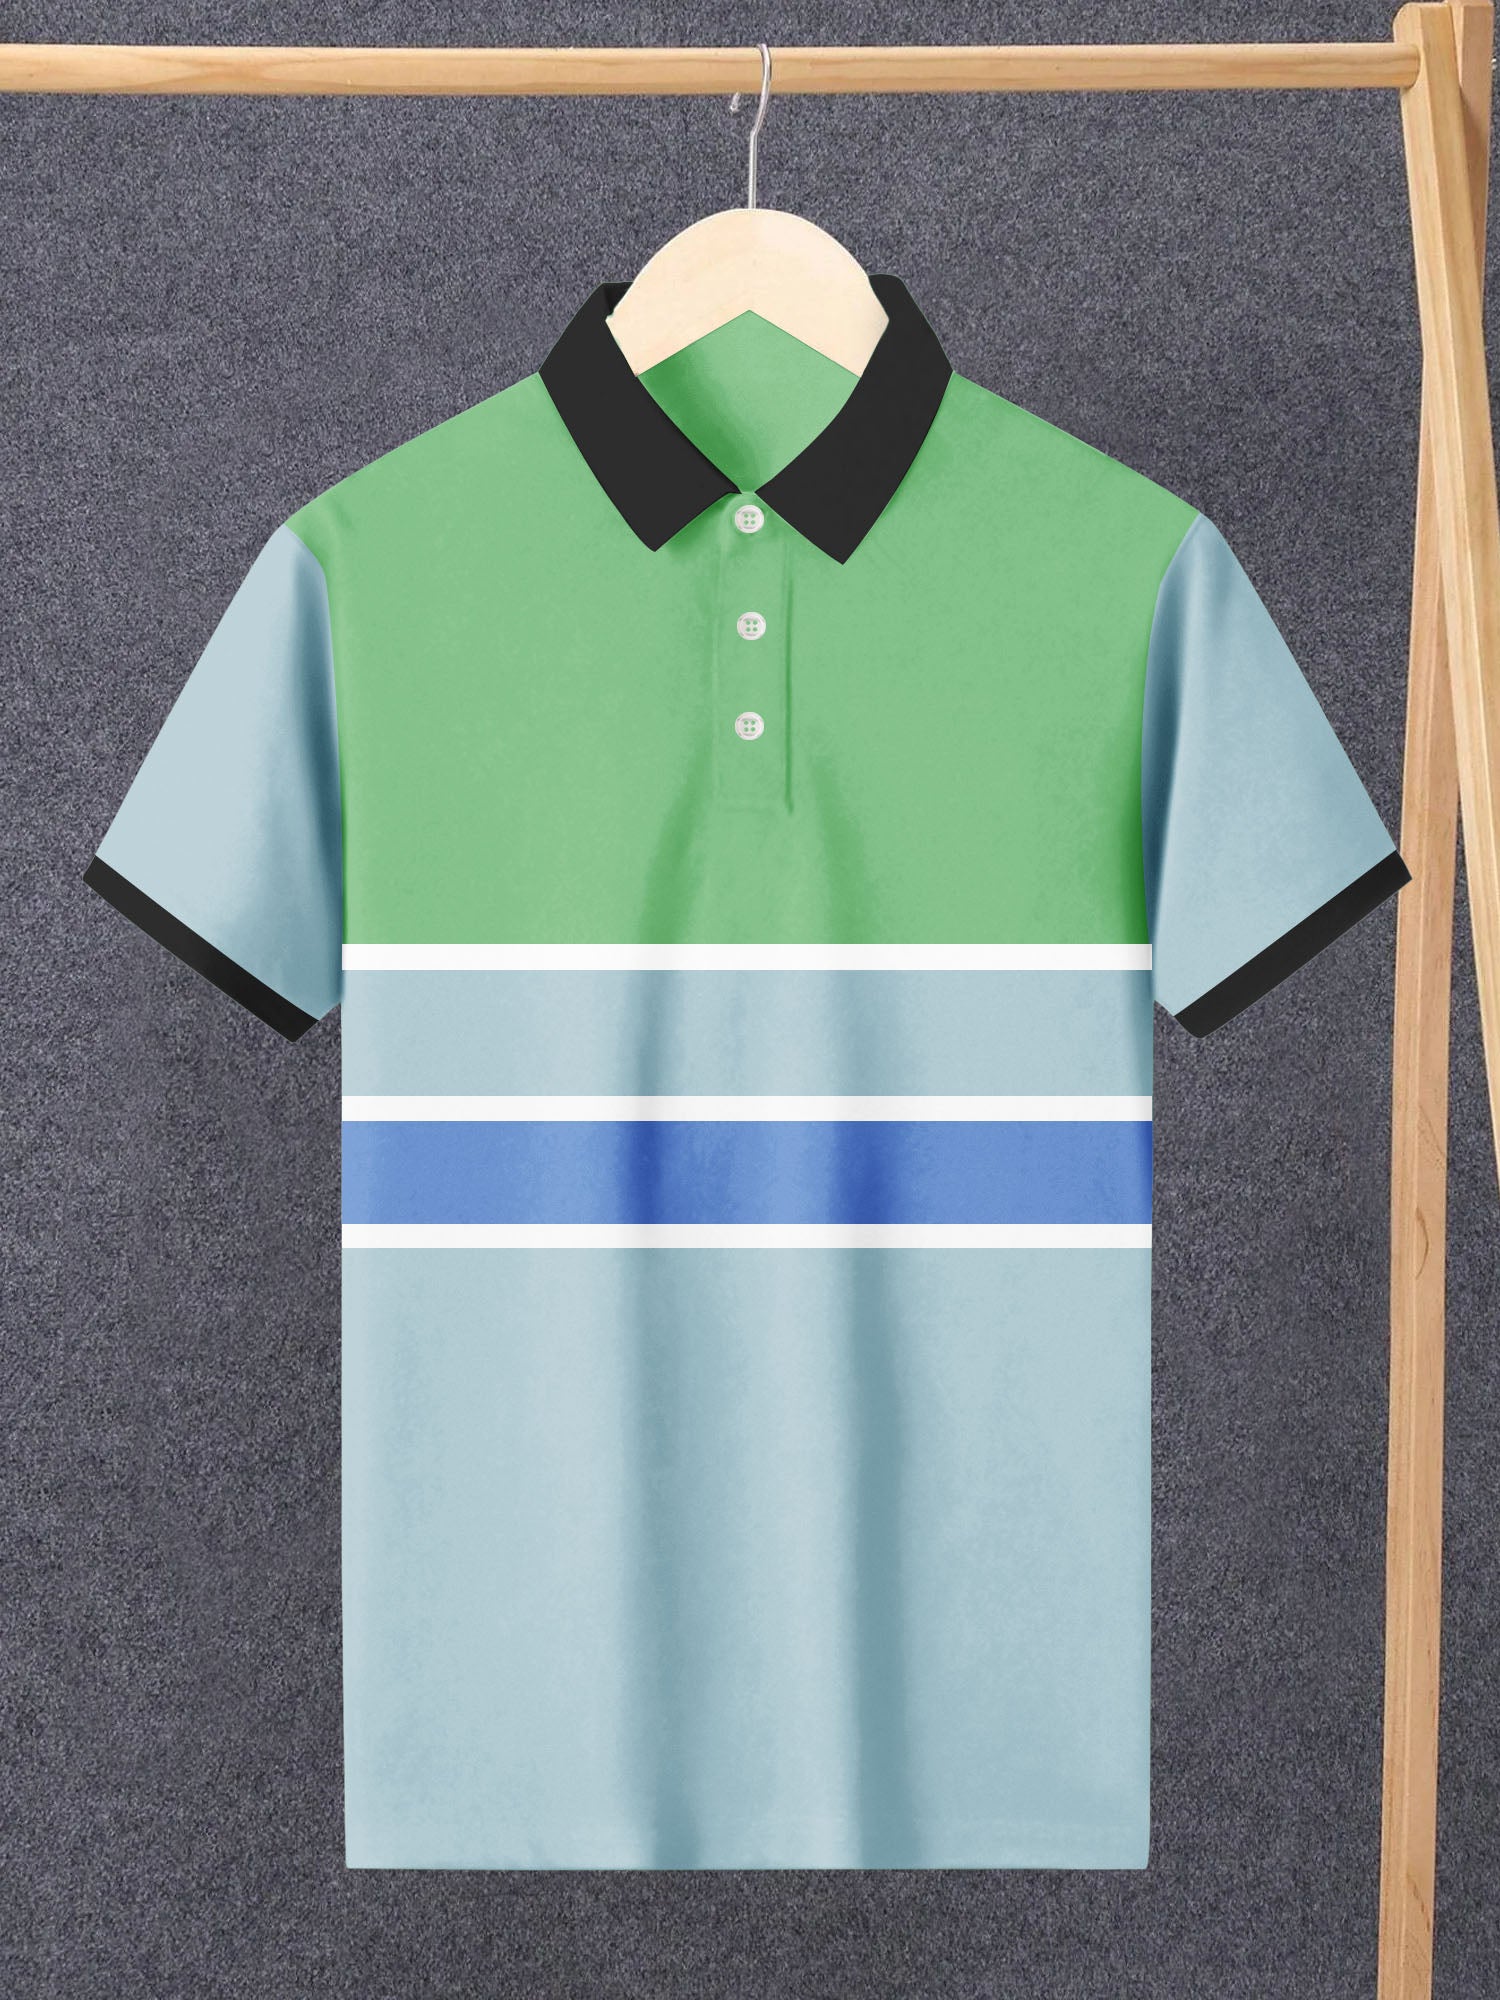 NXT Summer Polo Shirt For Men-Sky Blue & Cyan with Stripes-SP1518